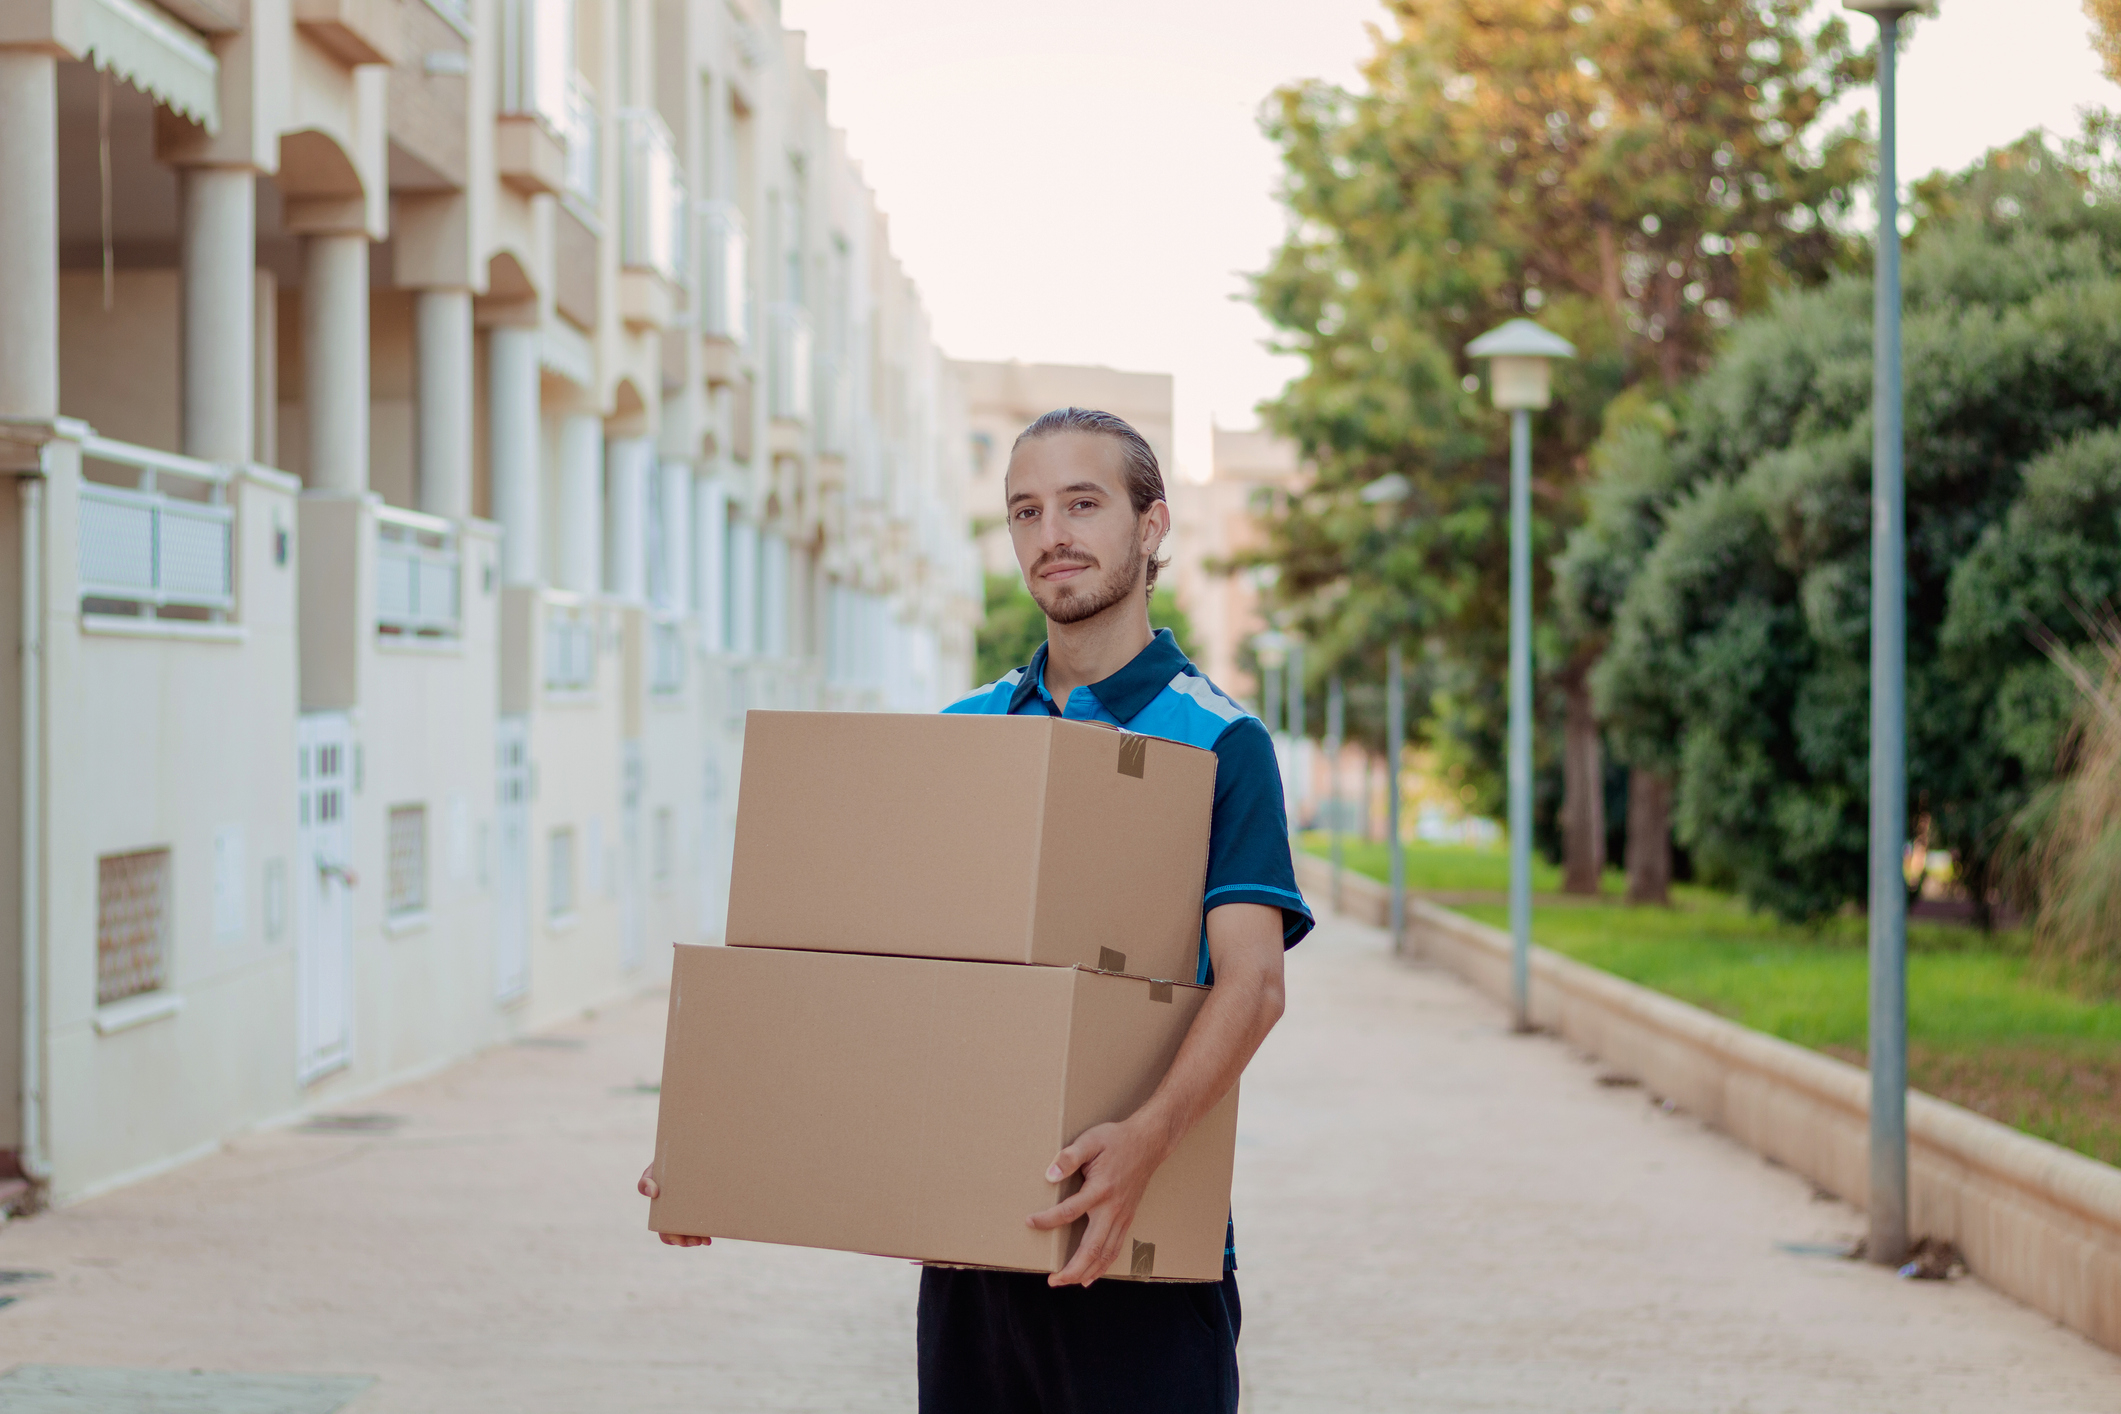 An Amazon delivery worker holding packages